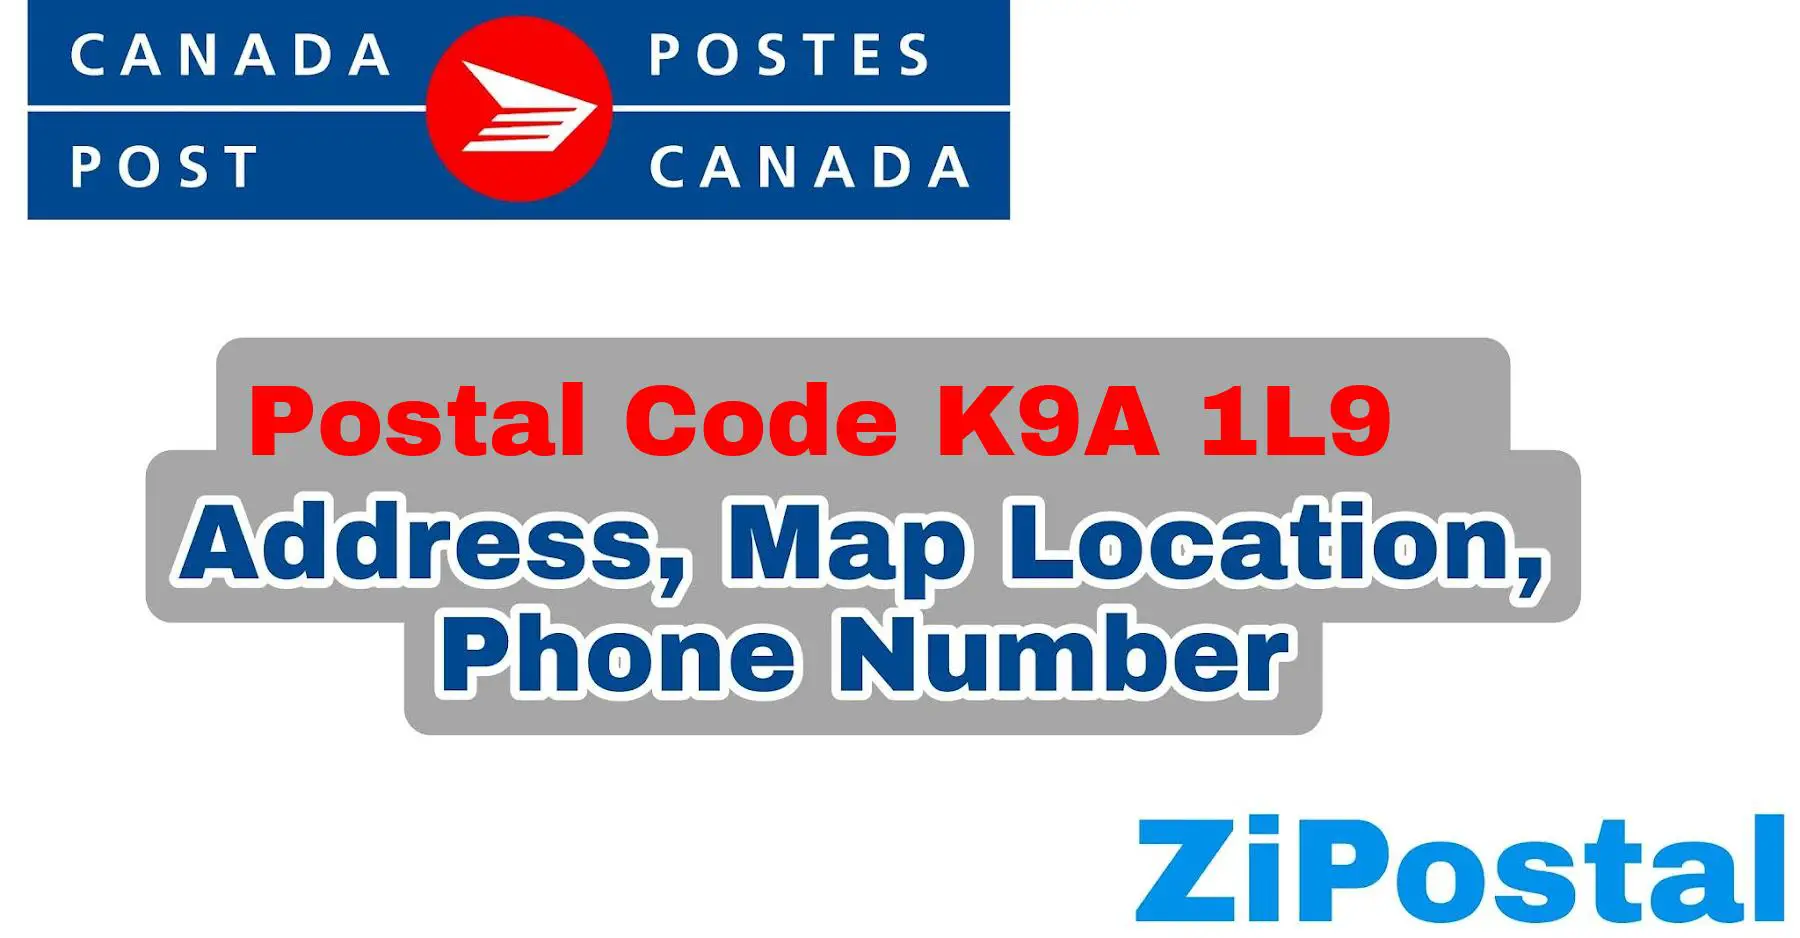 Postal Code K9A 1L9 Address Map Location and Phone Number